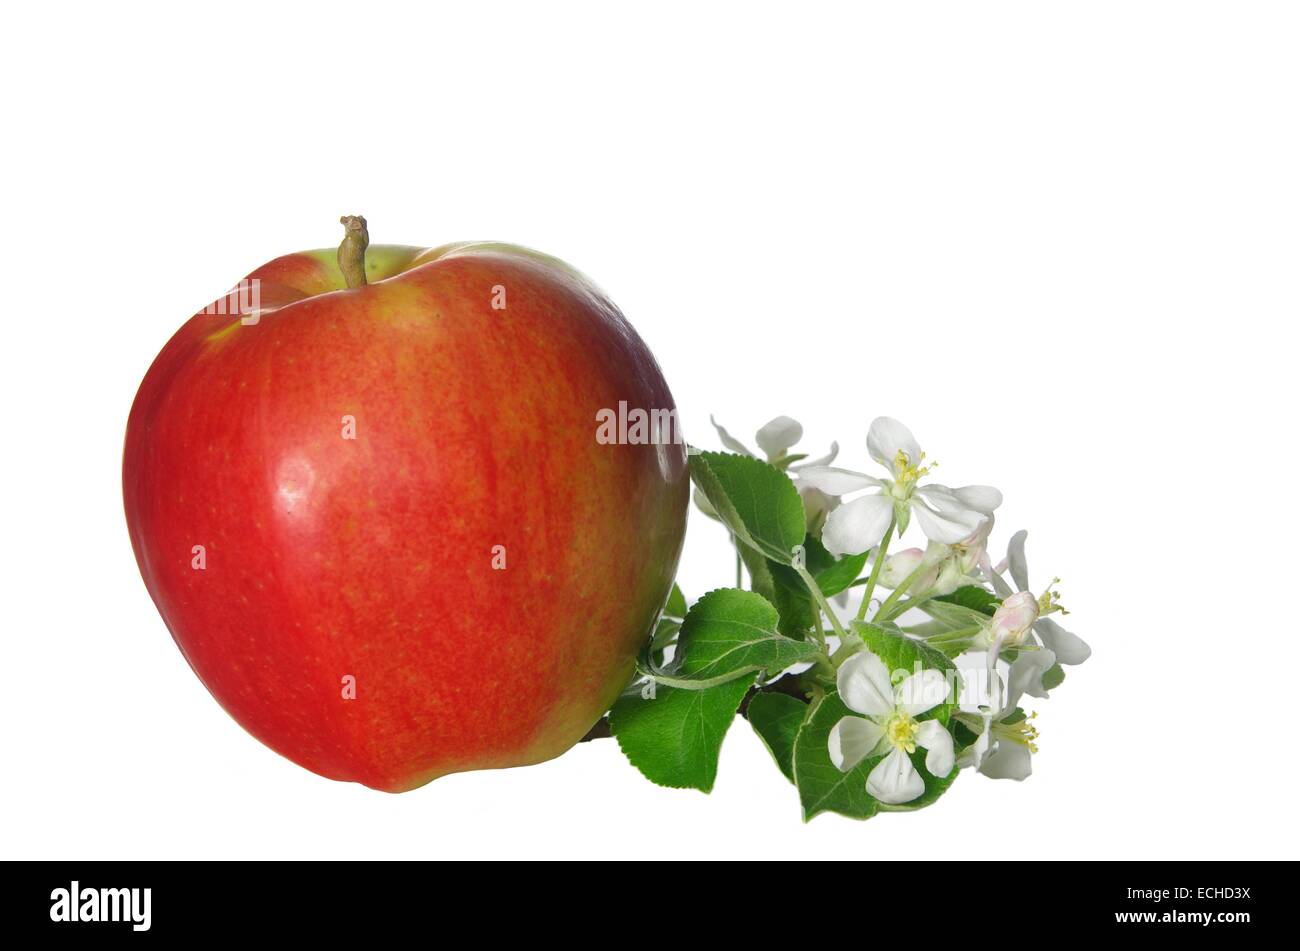 apple flowers and ripe red apples on a white background Stock Photo